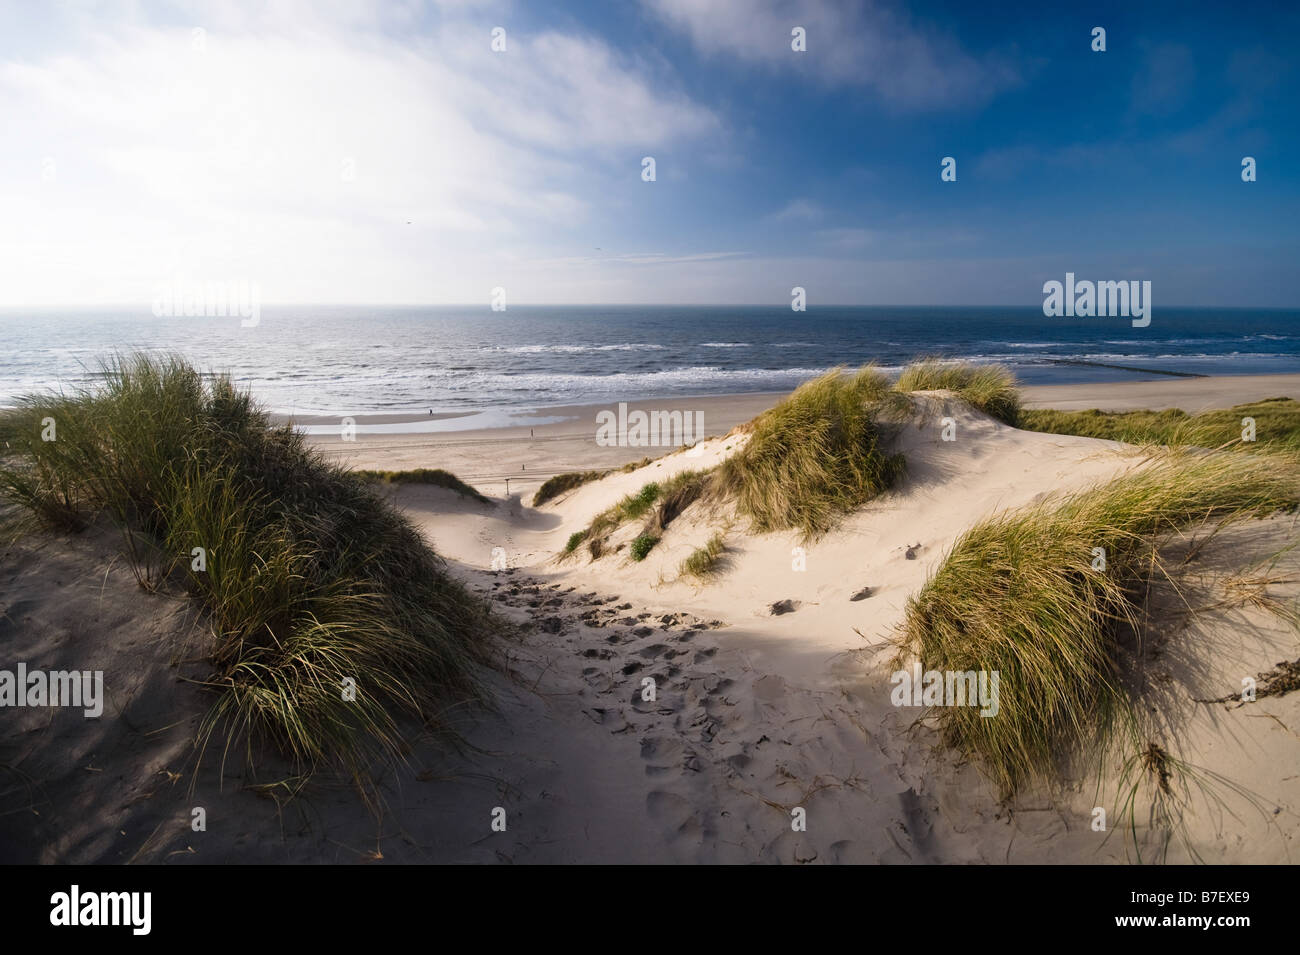 sand-dunes-and-ocean-in-the-netherlands-